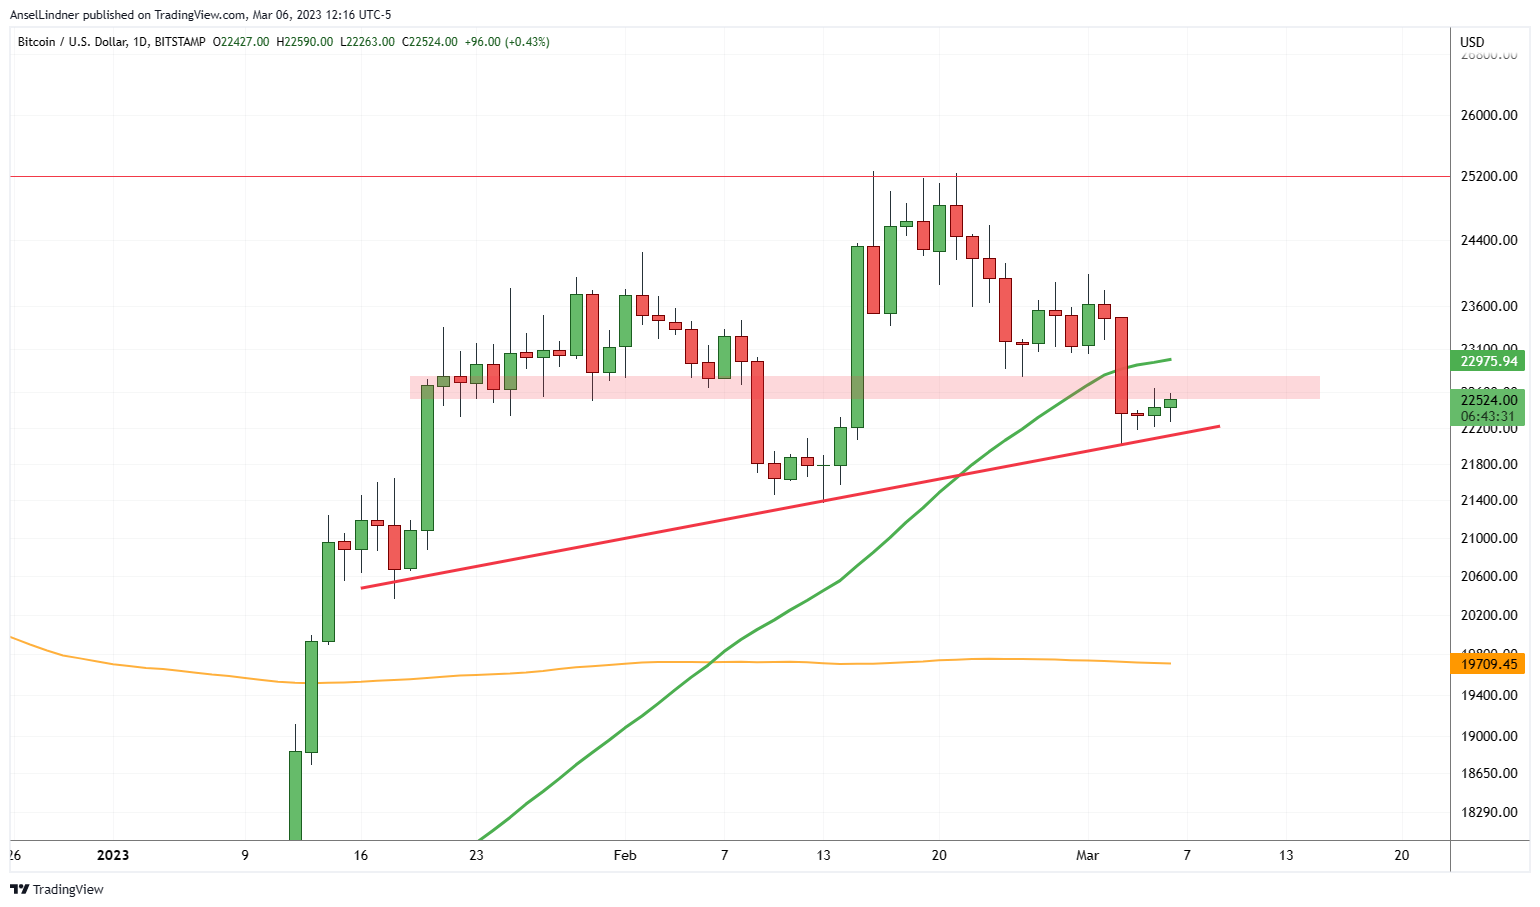 Bitcoin daily chart with 50 and 200-day moving averages